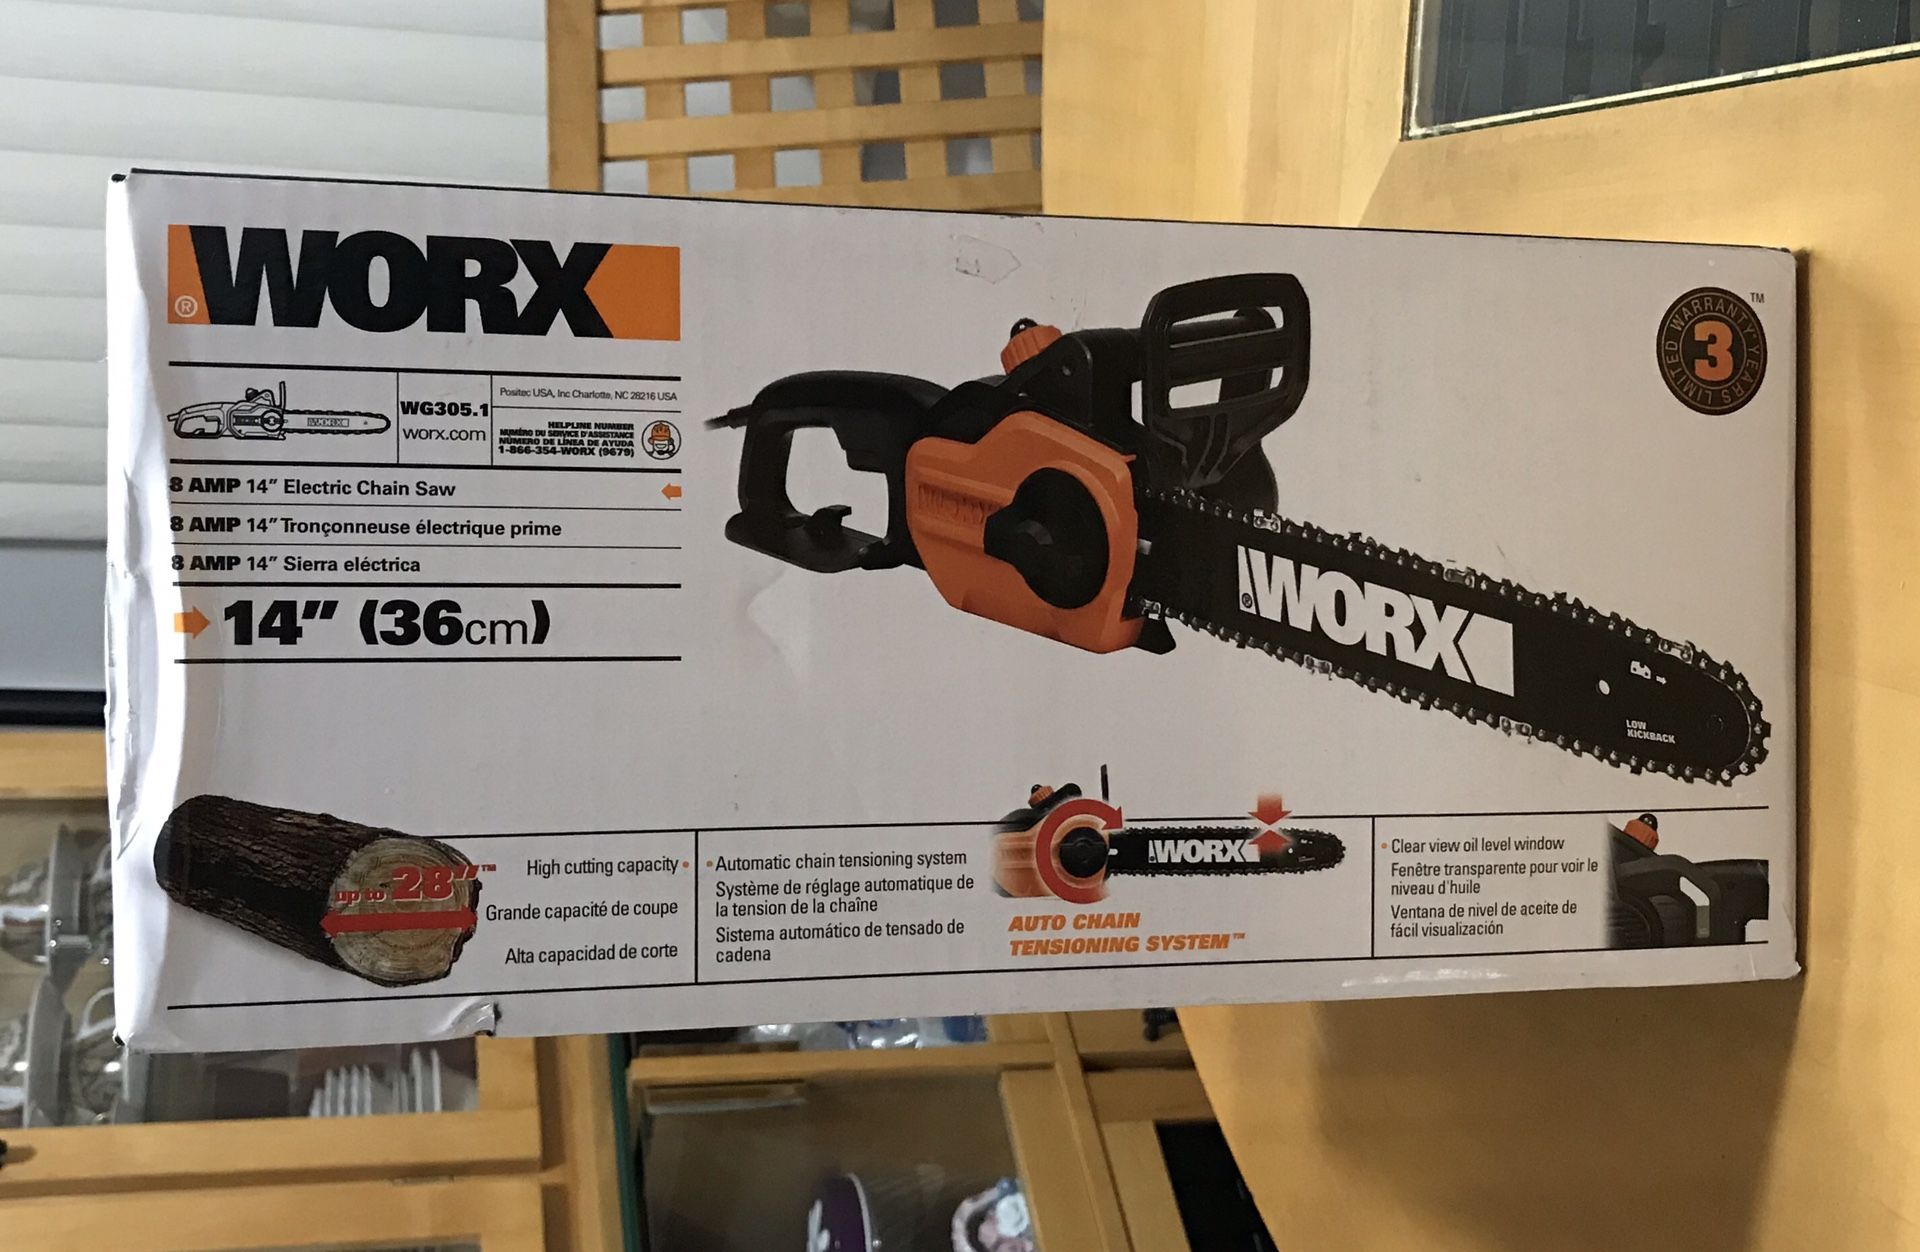 Brand New WORX 14" 8 Amp Electric Chainsaw with Auto-Tension